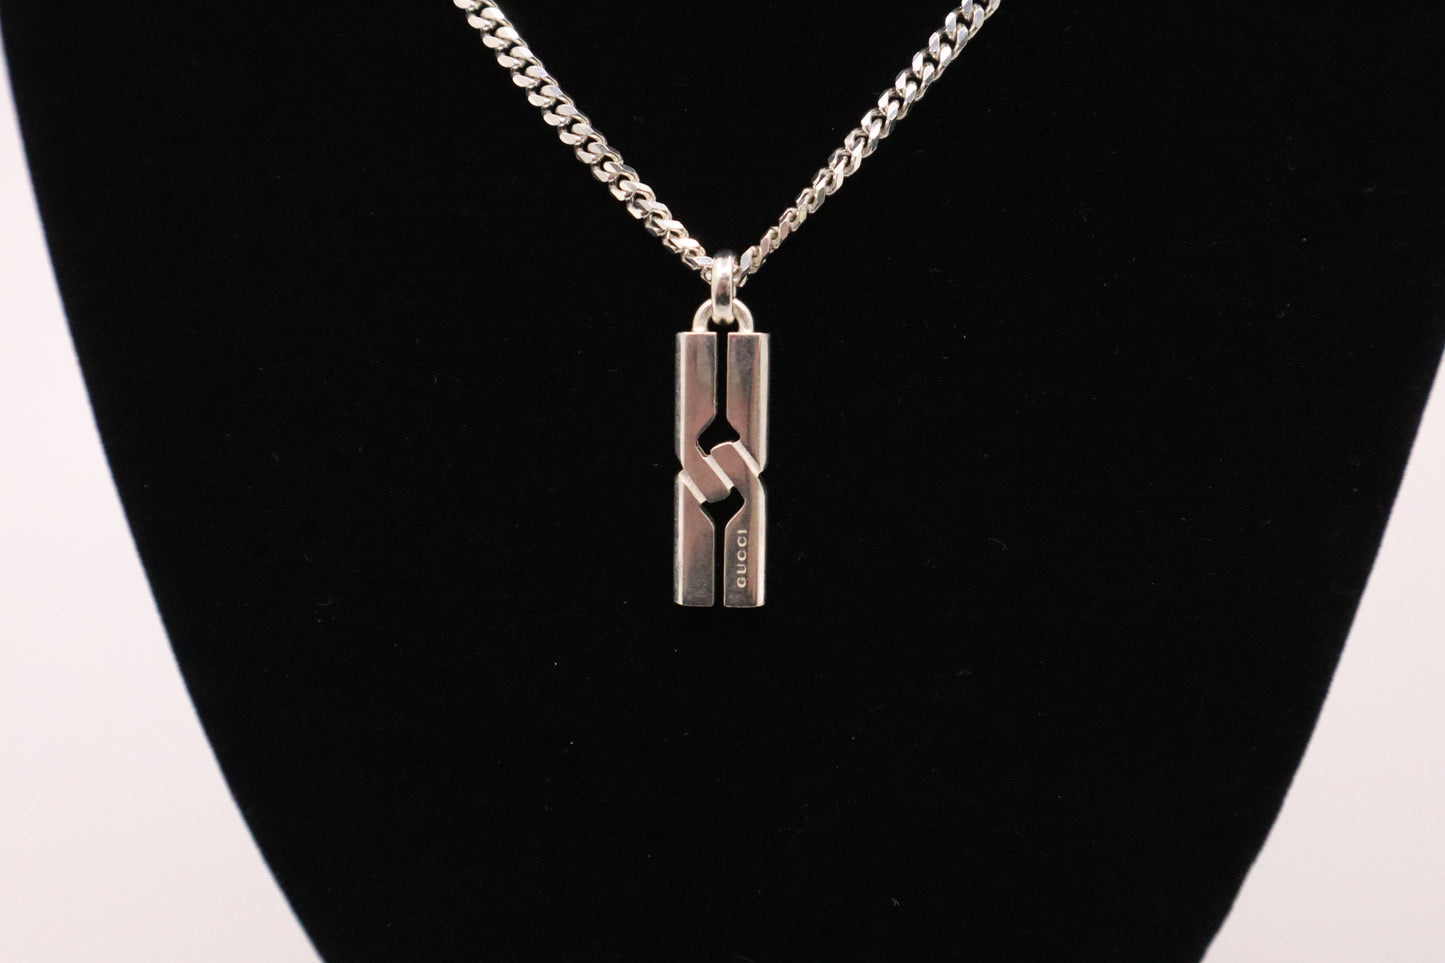 Gucci Necklace in Sterling Silver